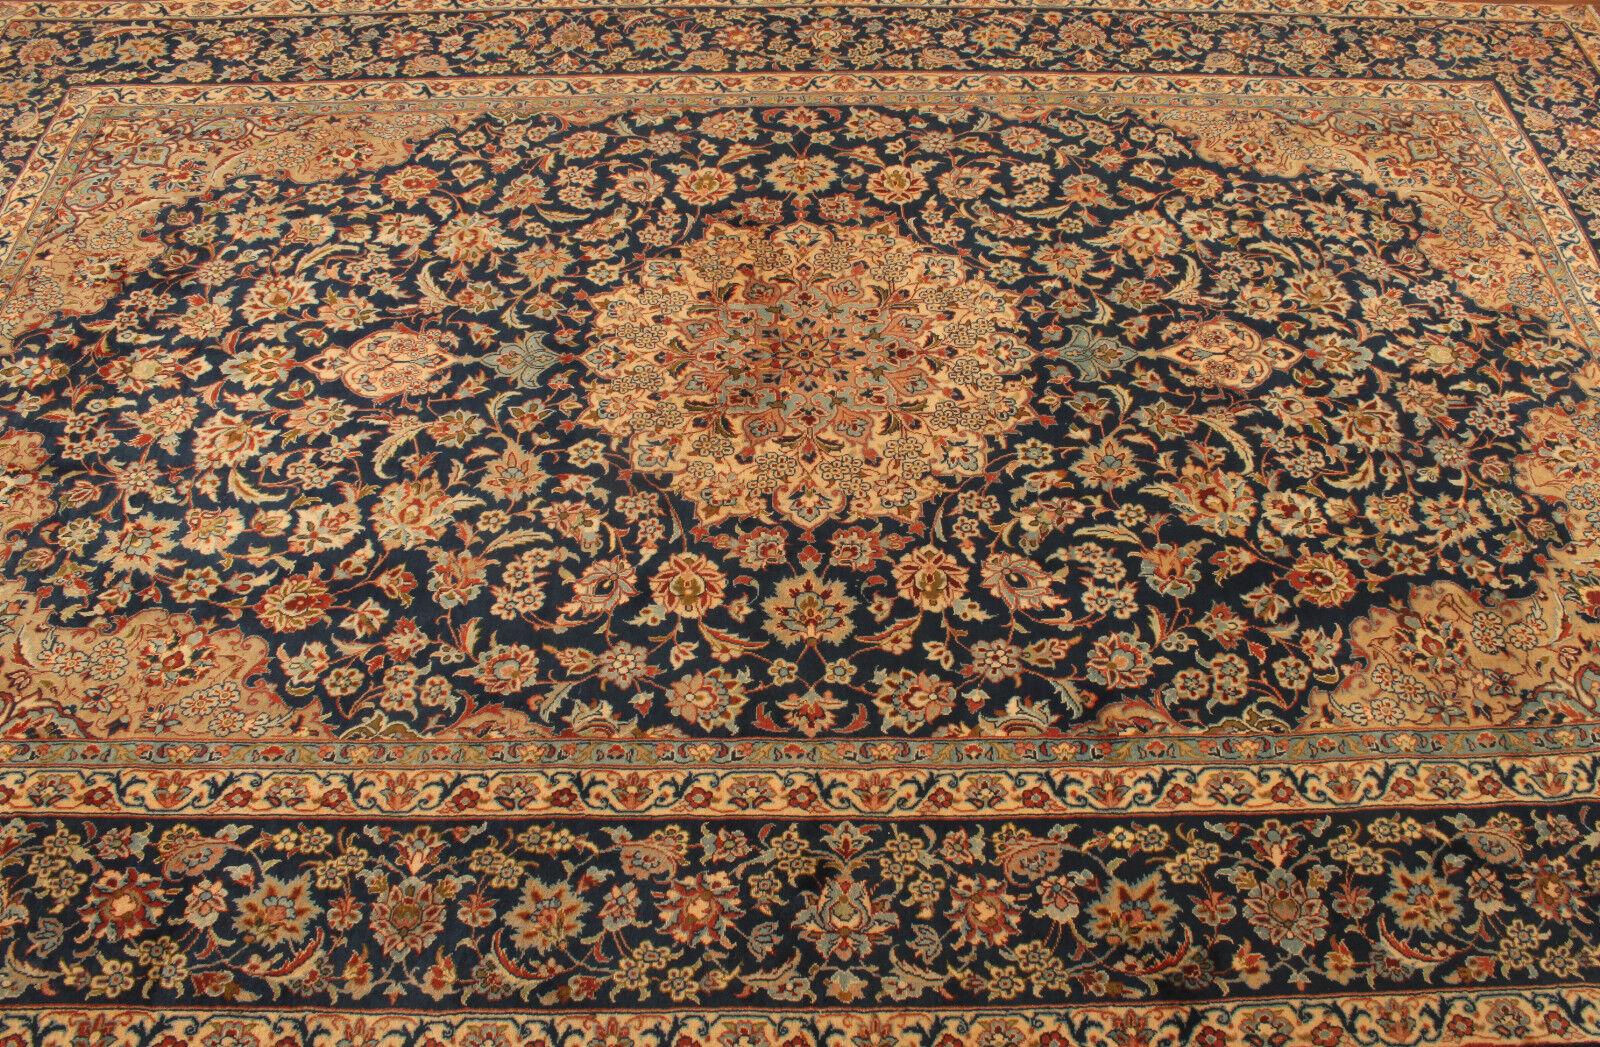 Handmade Vintage Persian Style Isfahan Rug 9.5' x 15', 1970s - 1T29 For Sale 1